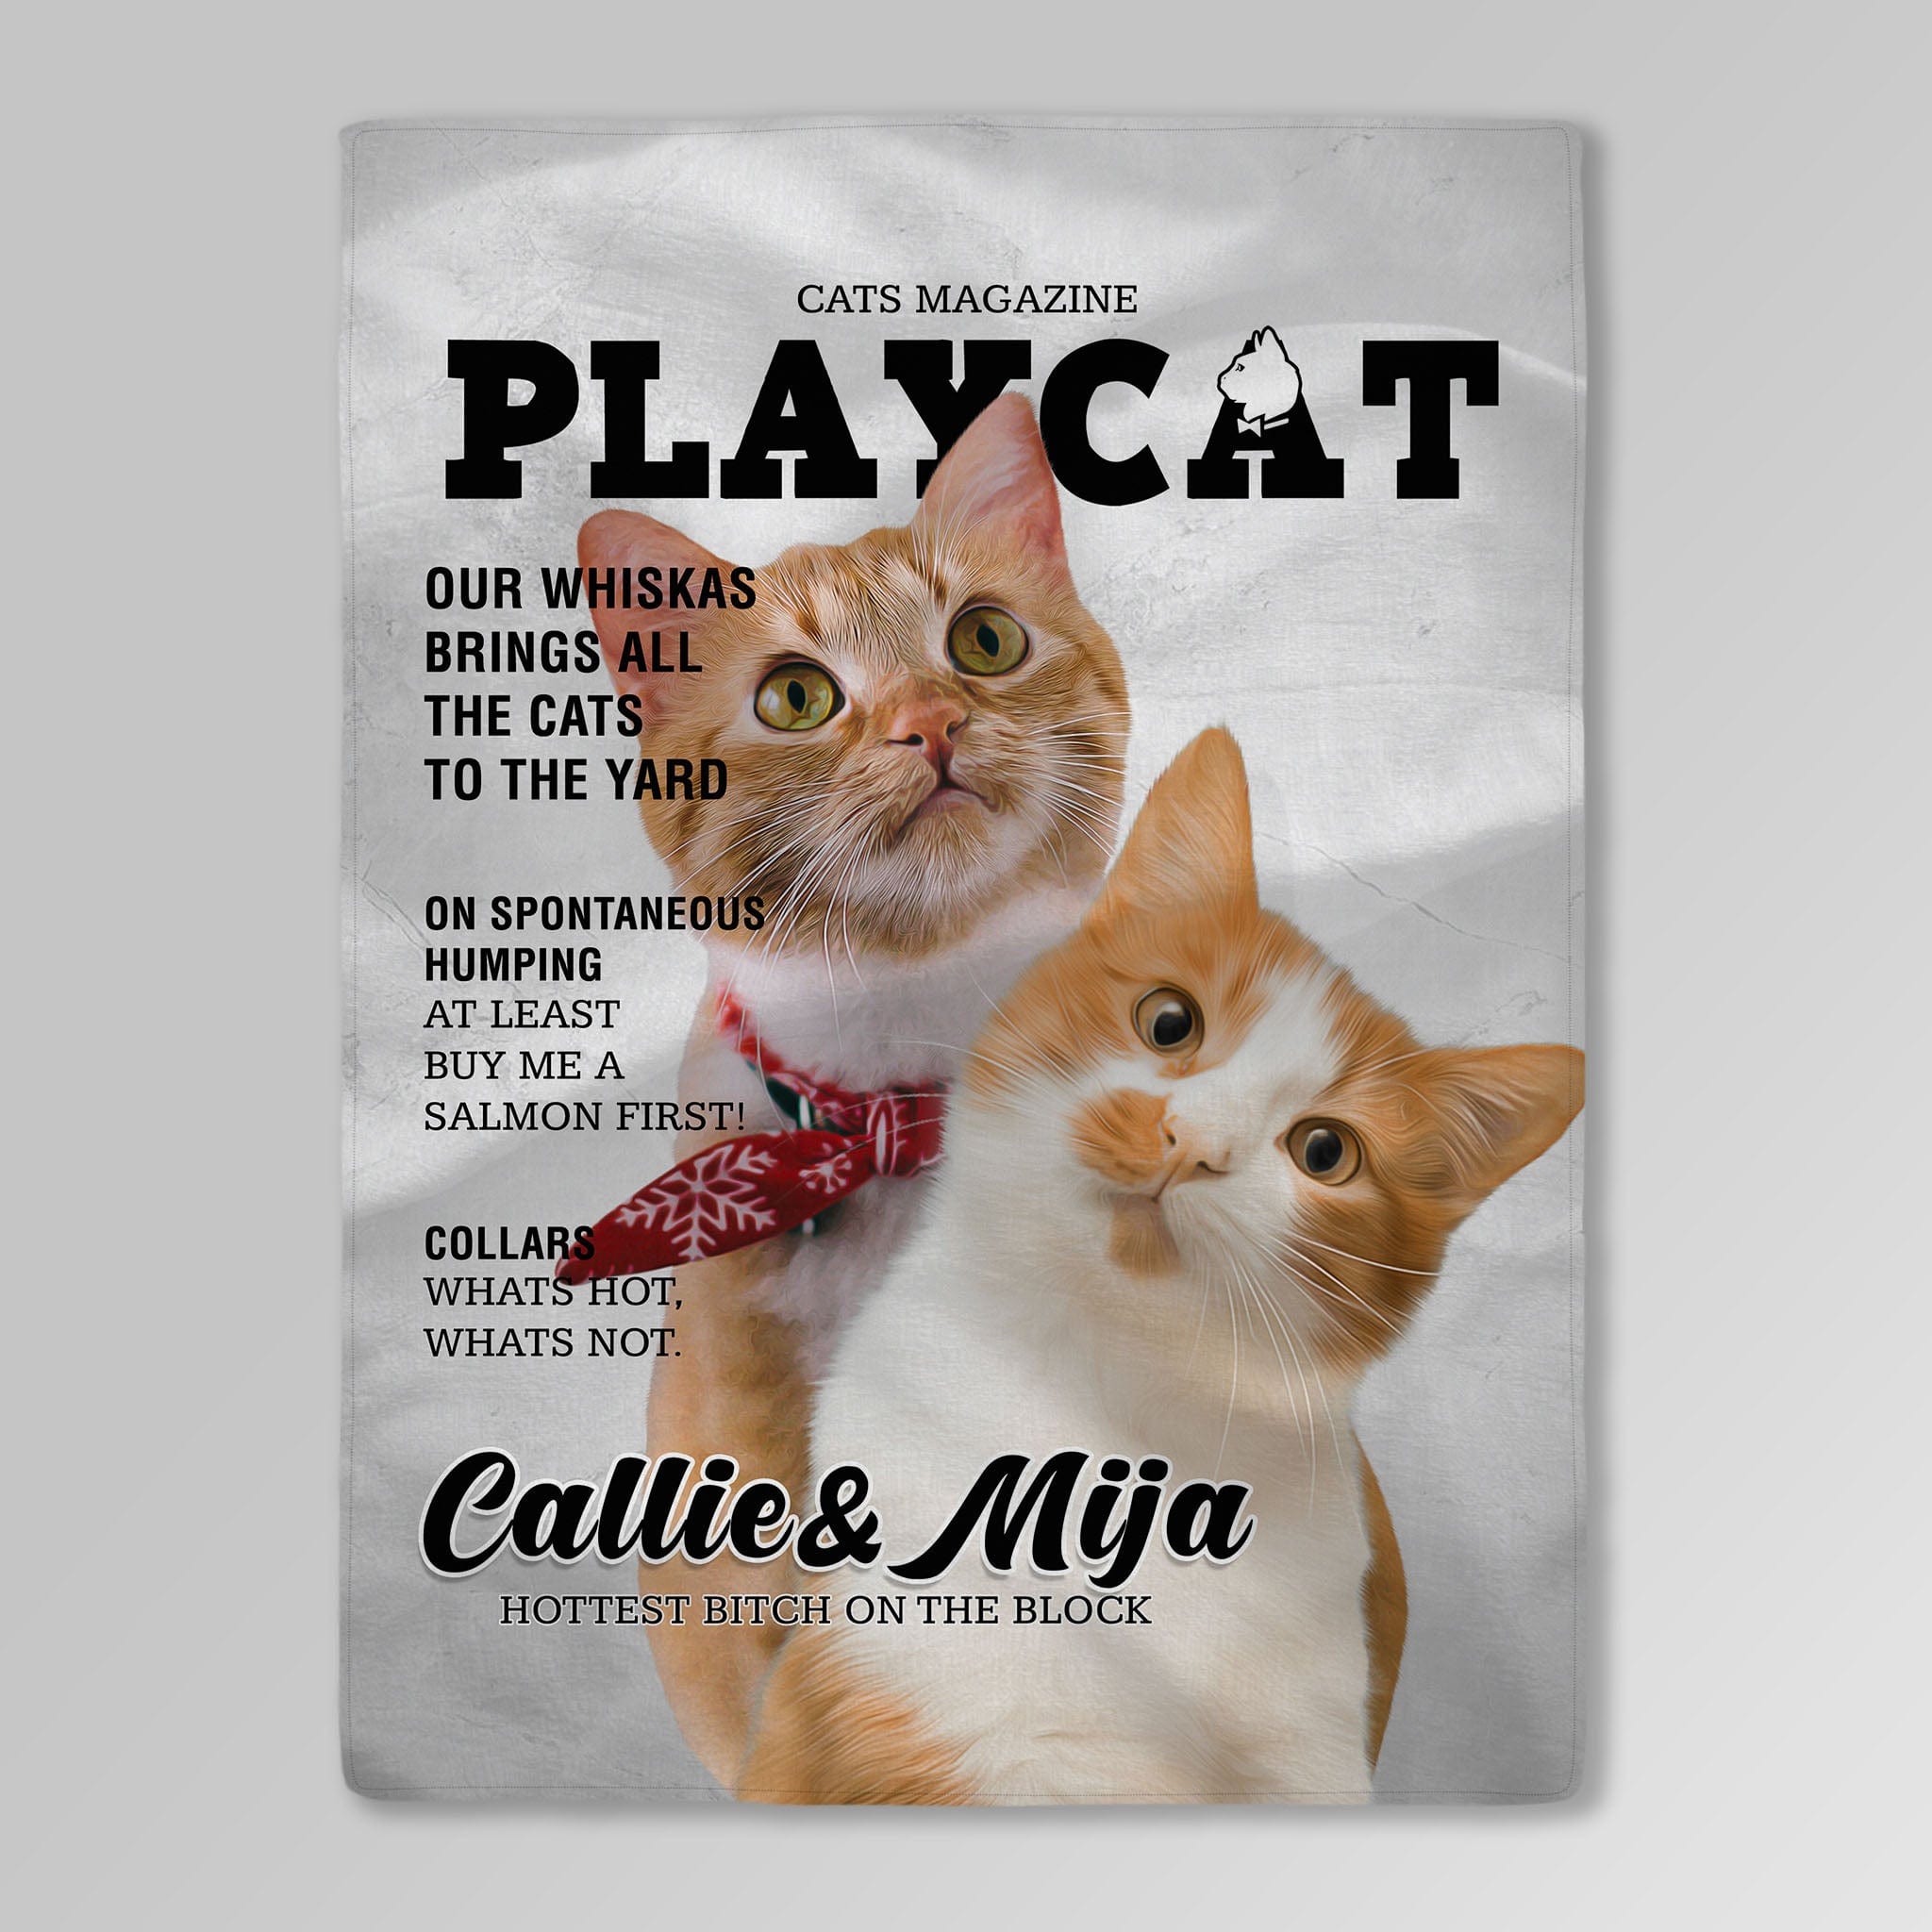 &#39;Playcat&#39; Personalized 2 Pet Blanket